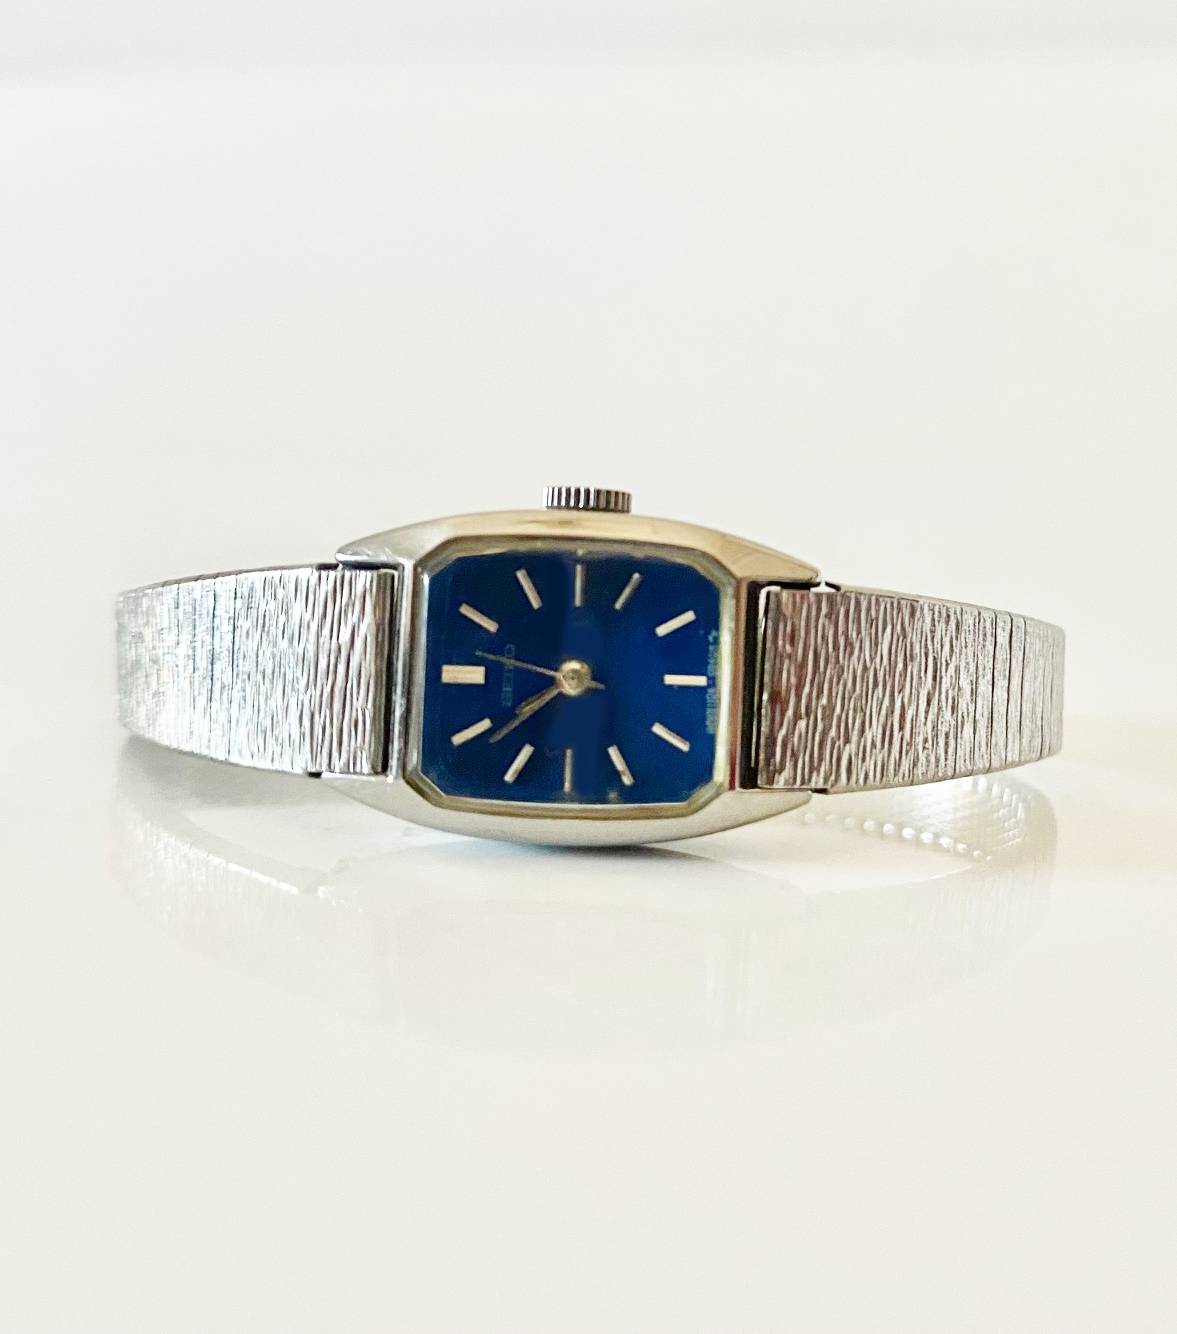 1970s Seiko Stainless Steel Blue Dial Jewel Watch - style - CHNGR